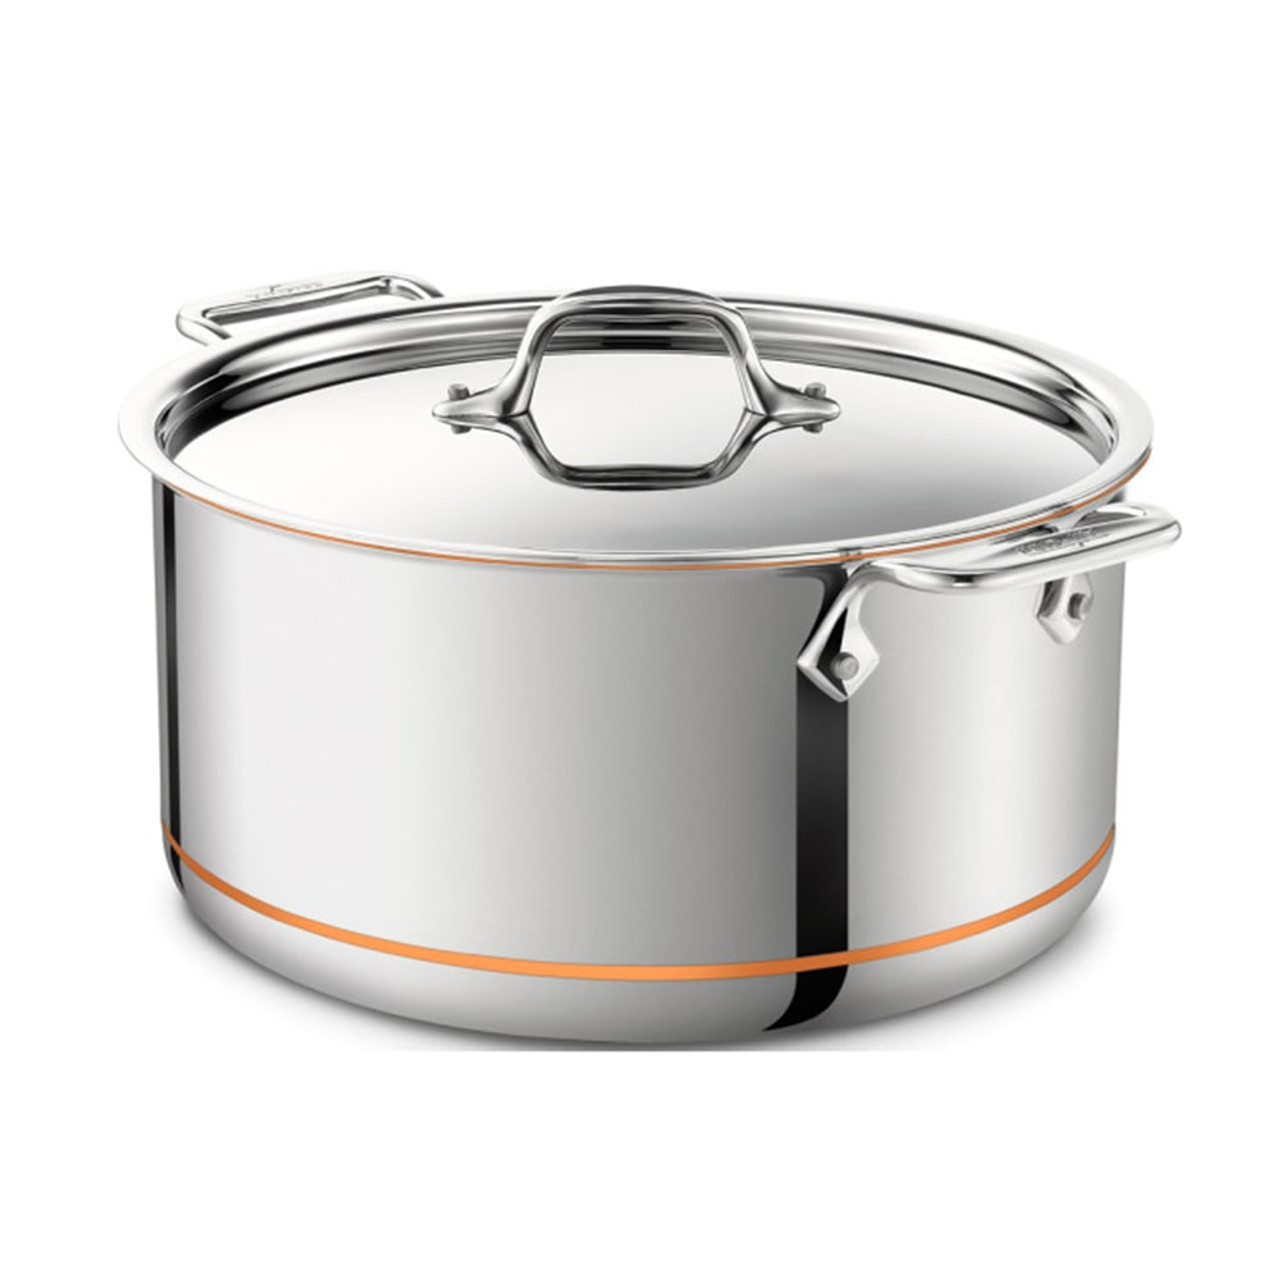 All-clad Stainless Steel And Copper Core 7 Pc. Cookware Set, Cookware Sets, Household